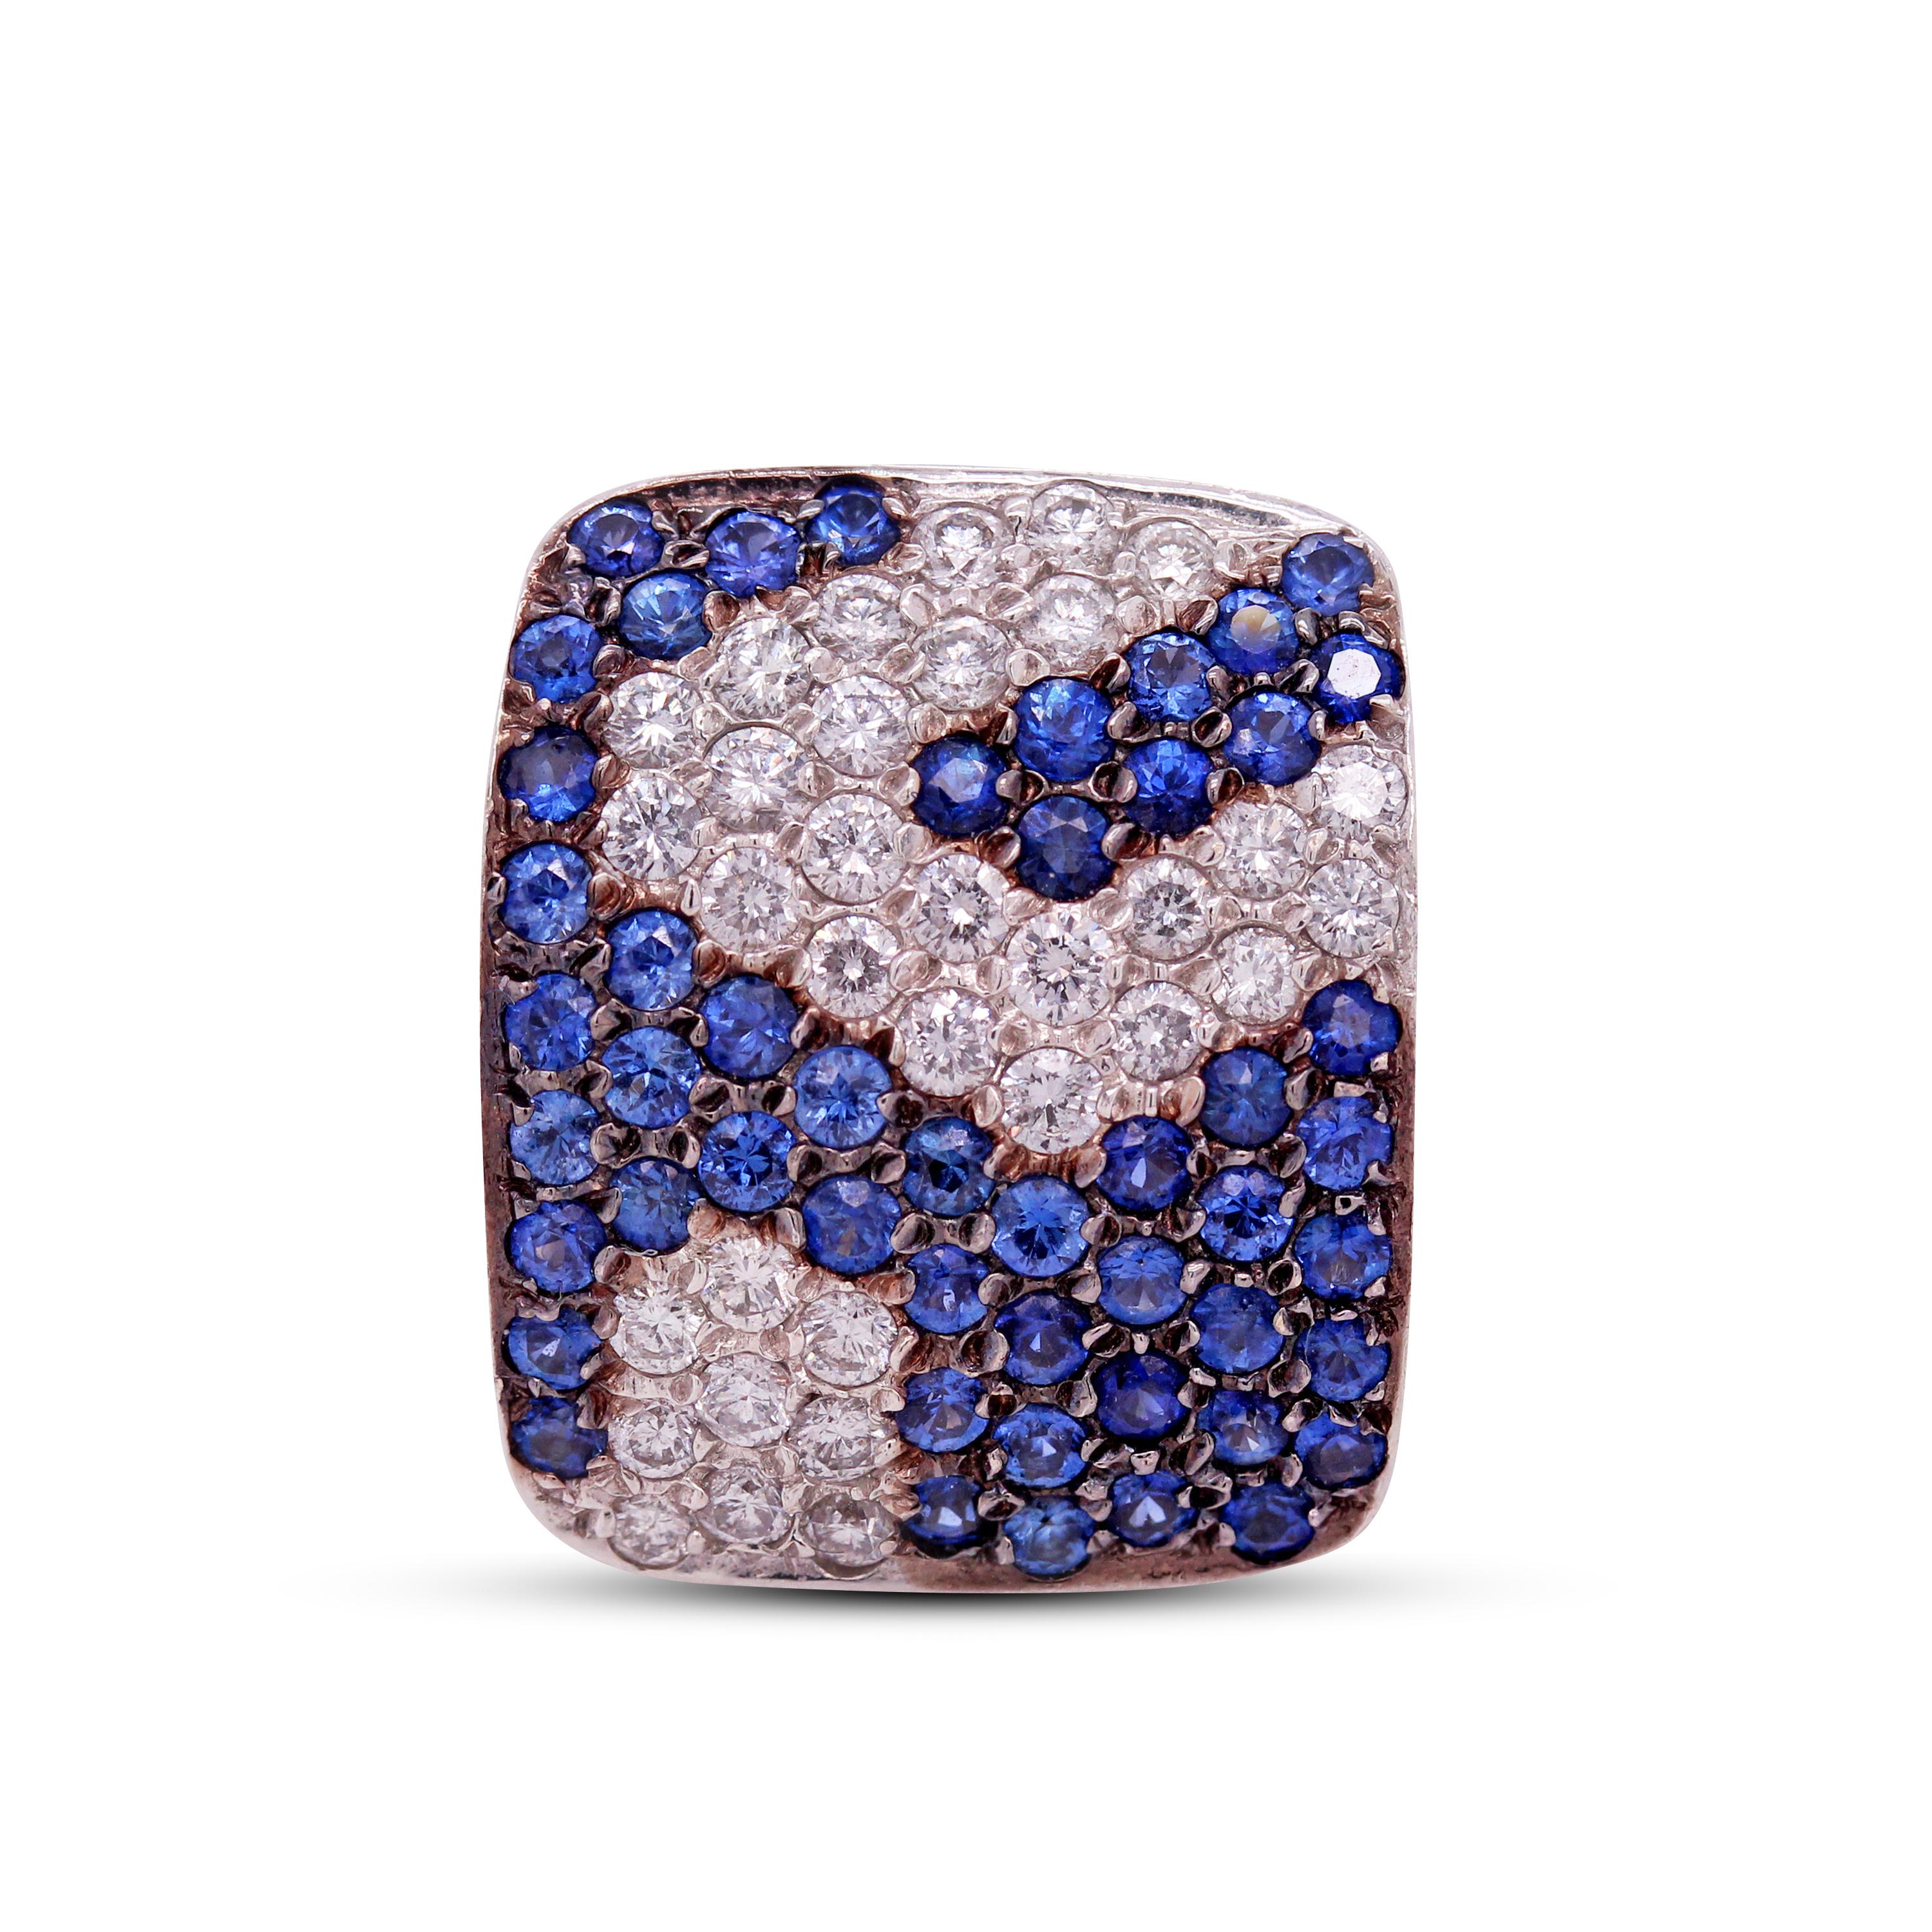 18K White Gold and Diamonds Blue Sapphires Square Face Cocktail Ring

Apprx. 2 carat Blue sapphires total weight
1 carat diamonds apprx. total weight

Ring face is 0.80 inch by 0.65 inch
Band is 6mm in width

Size 7. Sizable by request.